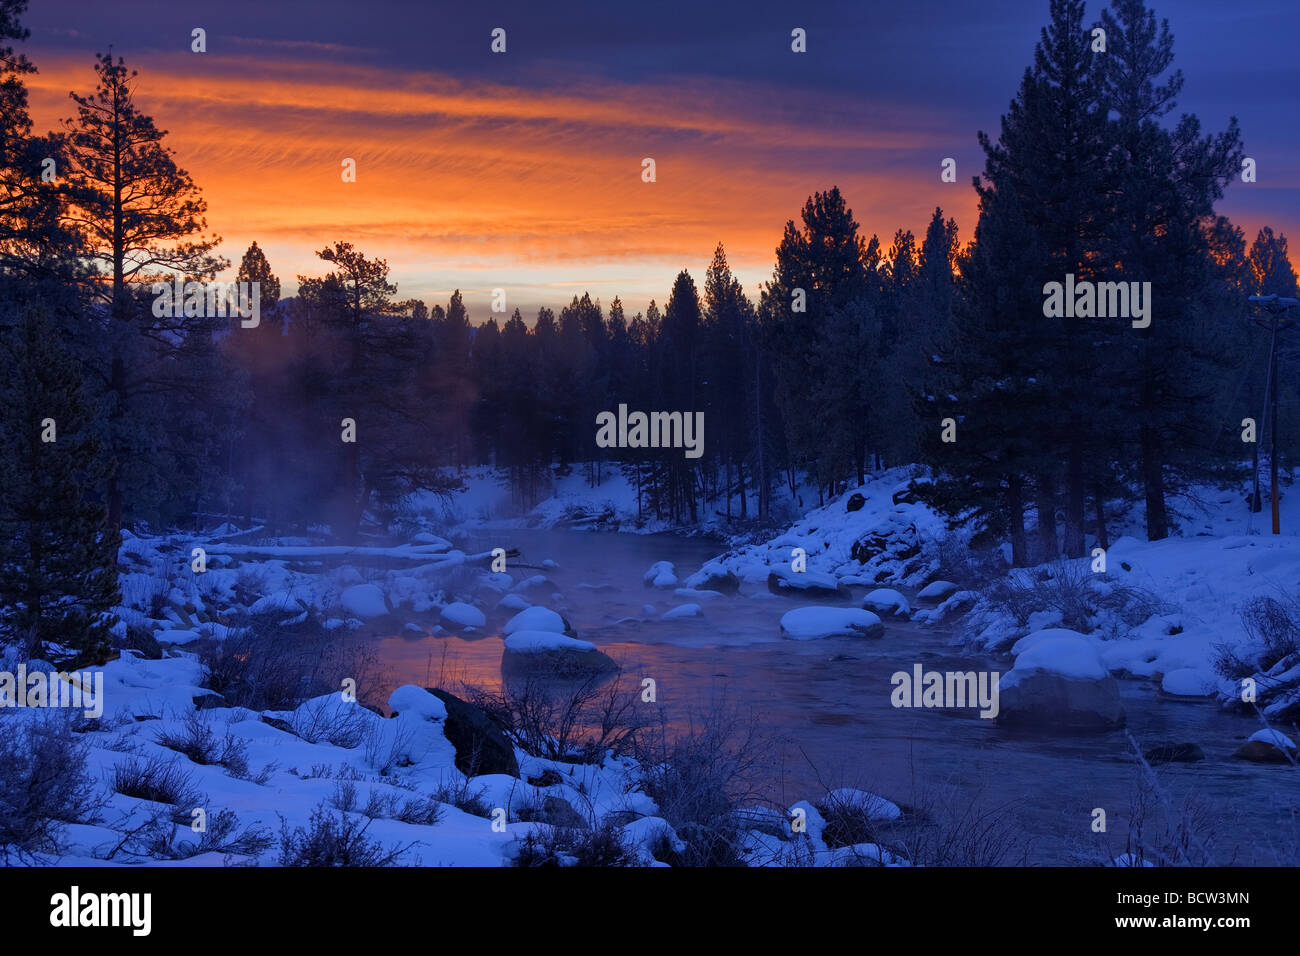 Silhouette of trees at the riverside during sunrise, Truckee River, California, USA Stock Photo